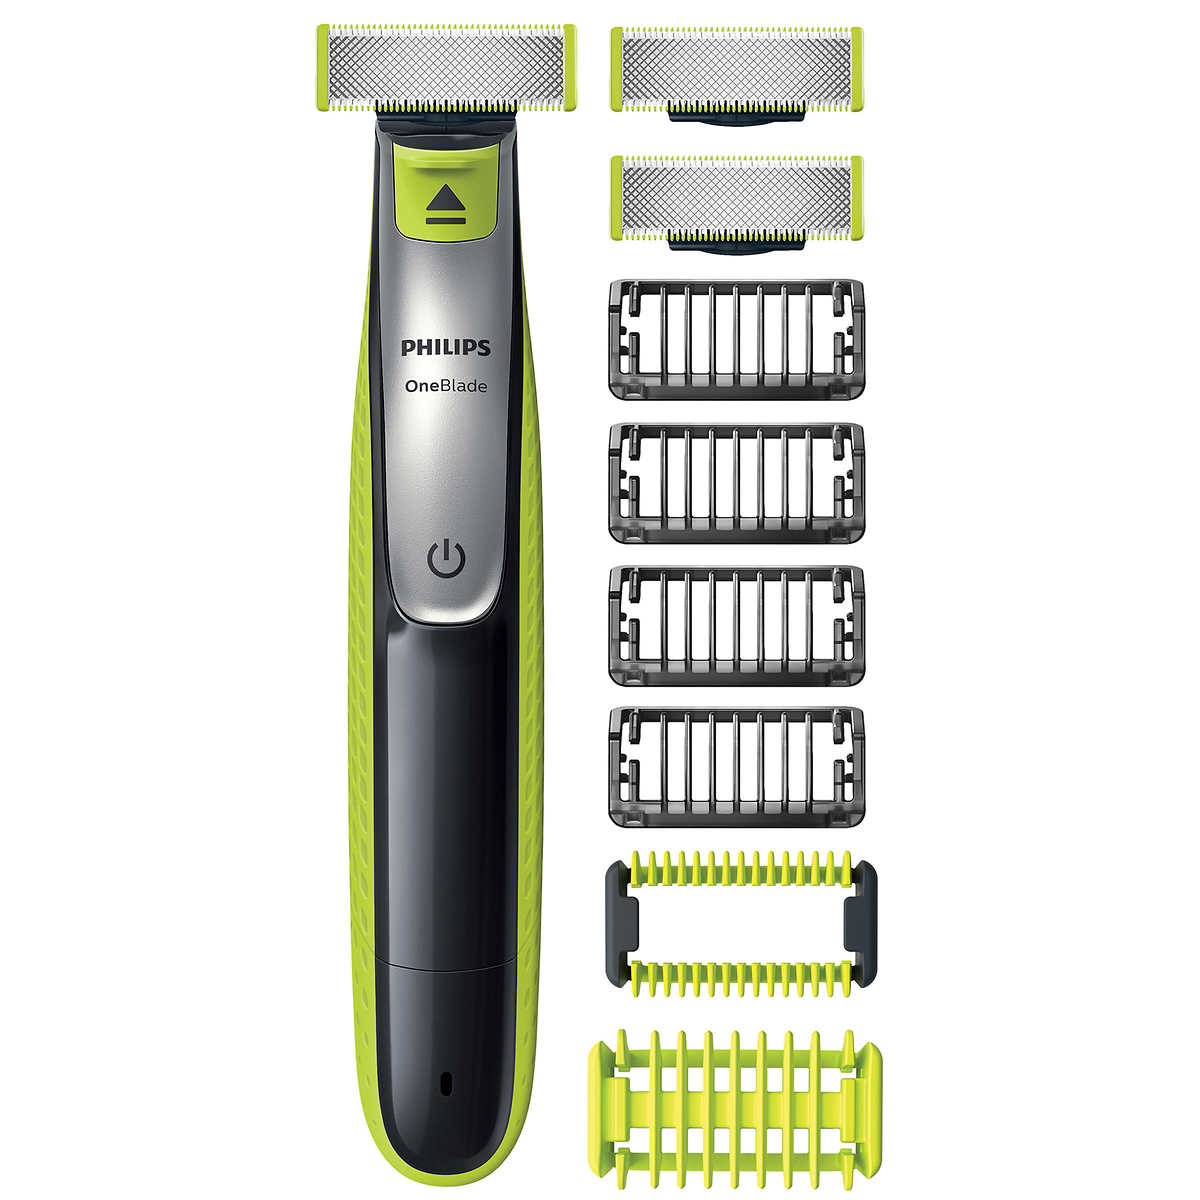 philips one blade for face and body